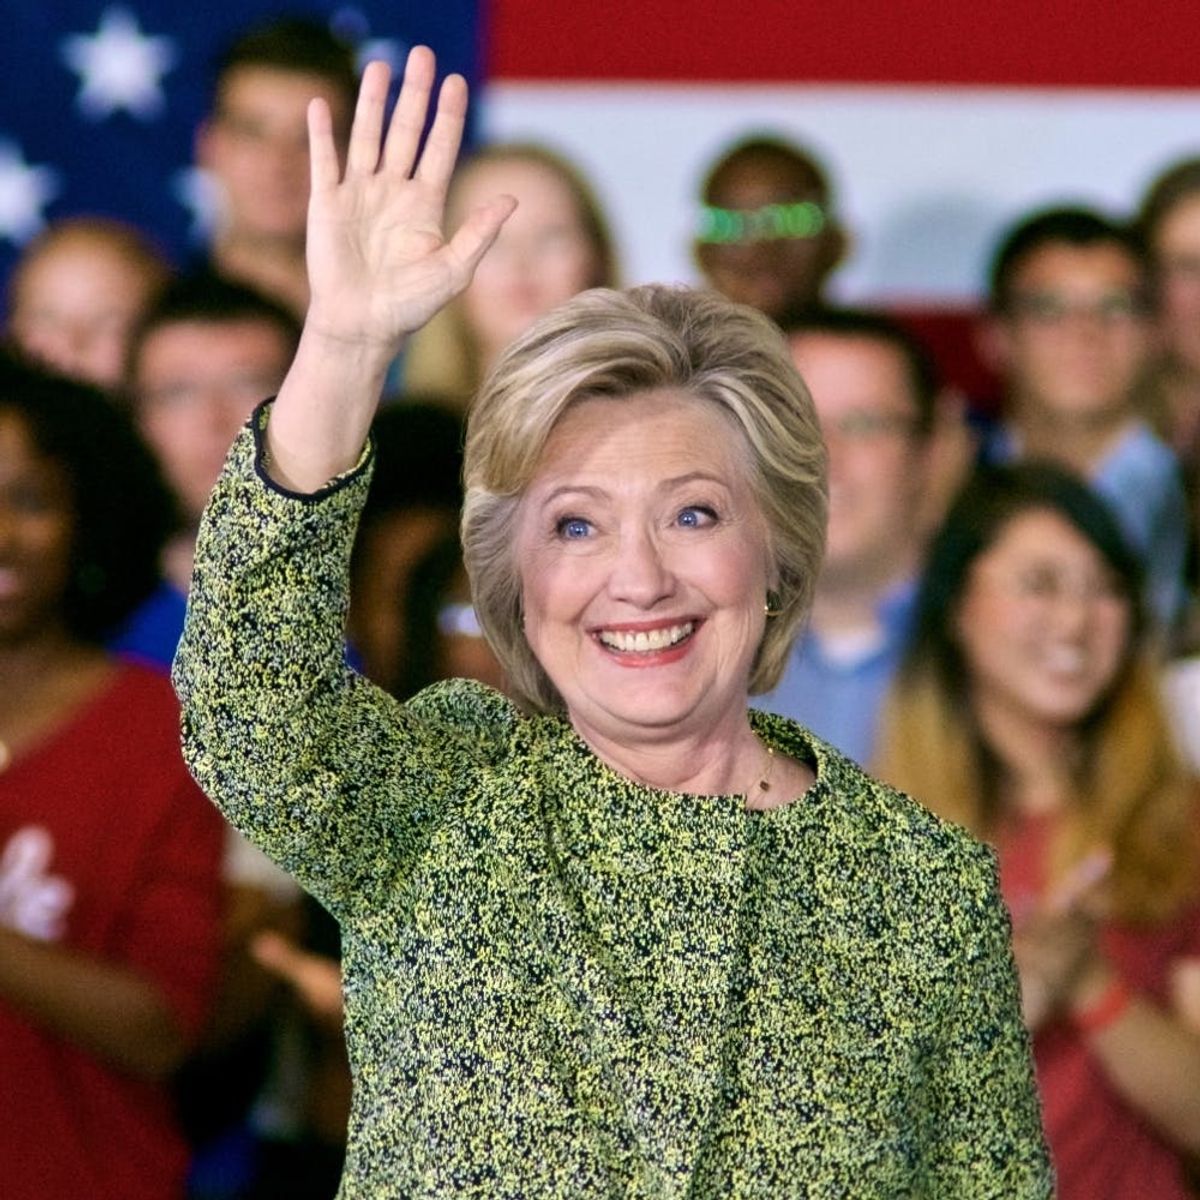 Hillary Clinton Made Her First Public Appearance Since the Election and It Was All About Hope